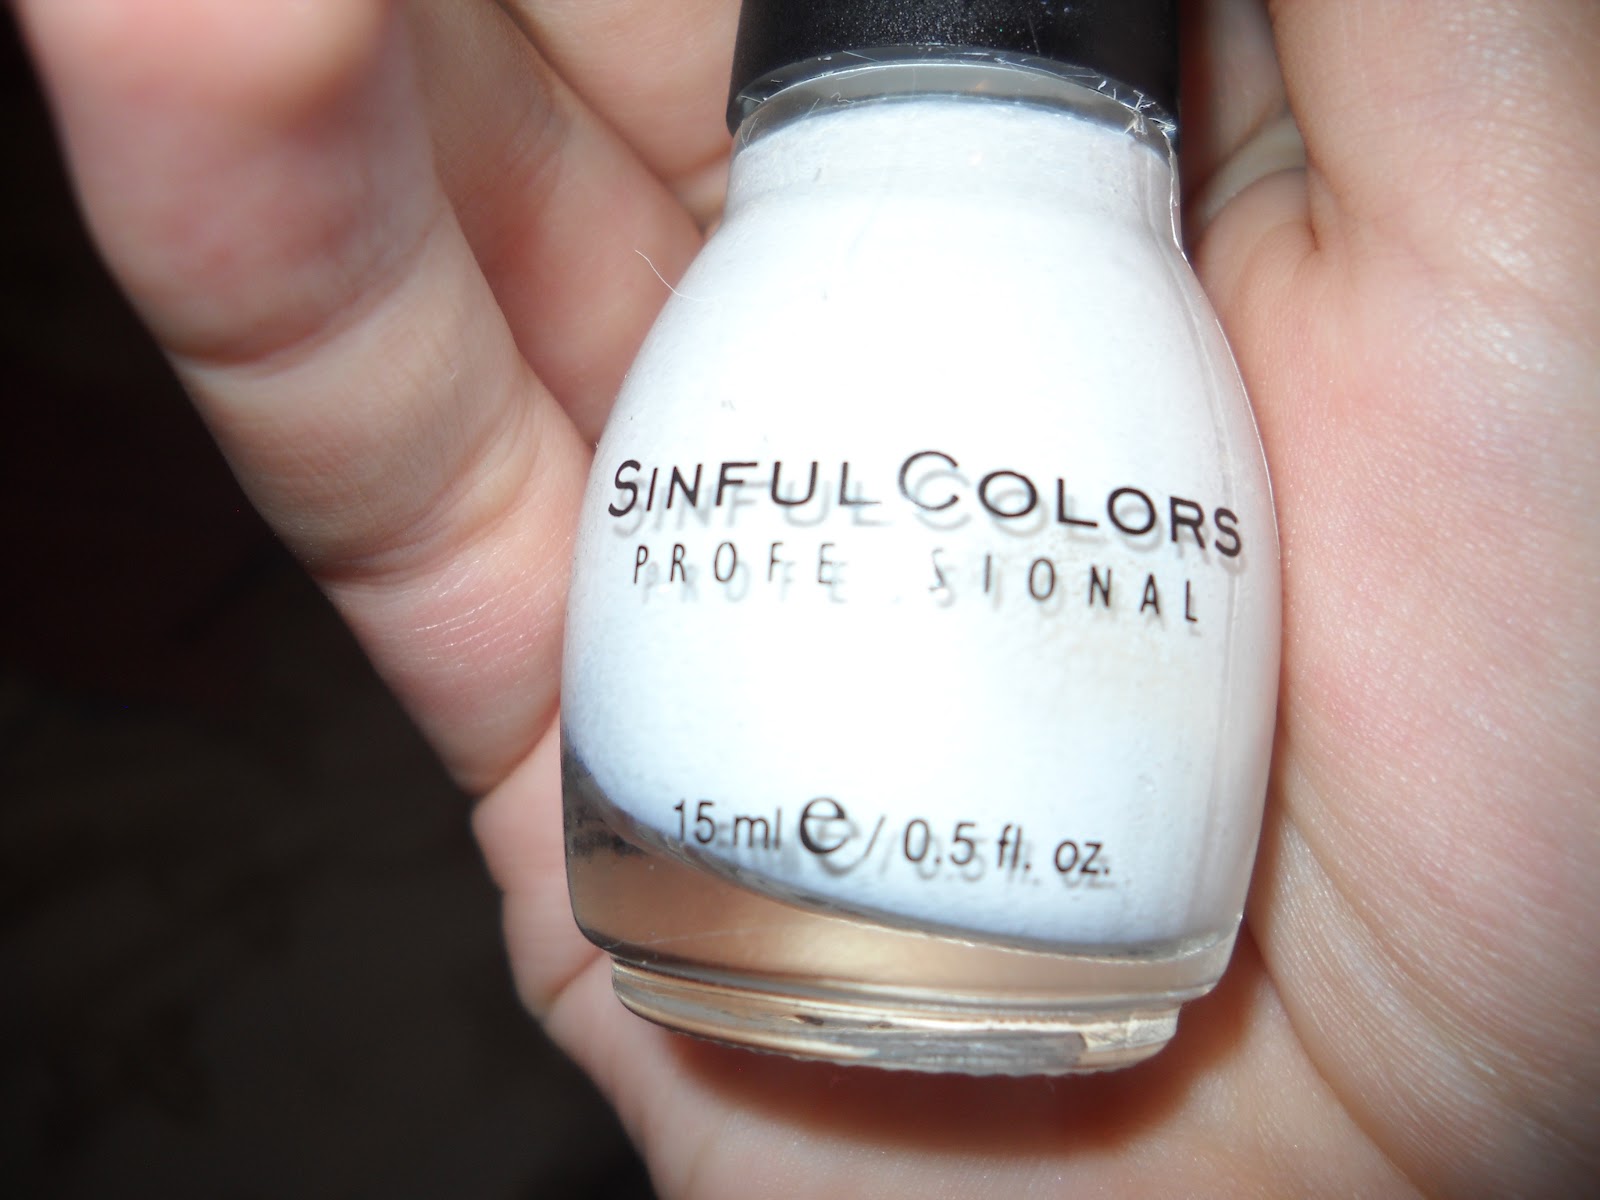 Sinful Colors Professional Nail Polish, Snow Me White - wide 4